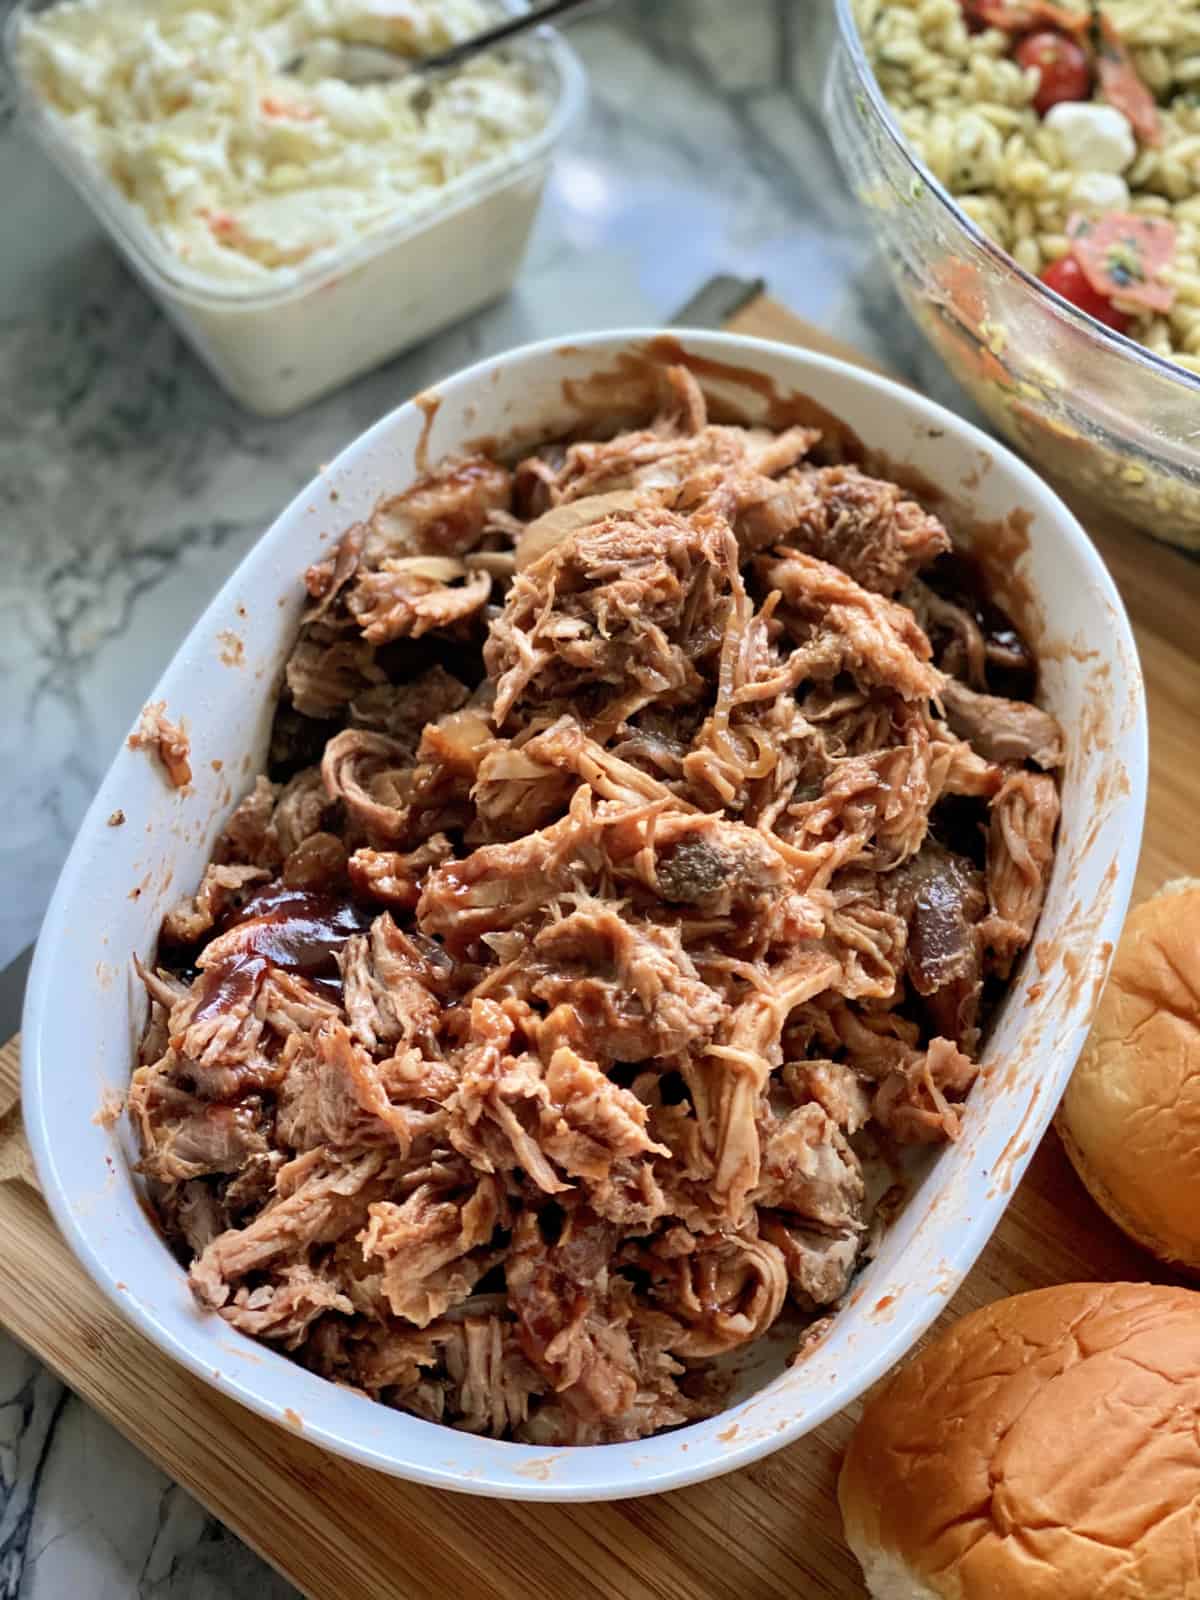 White oval baking dish with shredded pulled pork on a wood cutting board with sides around the dish.